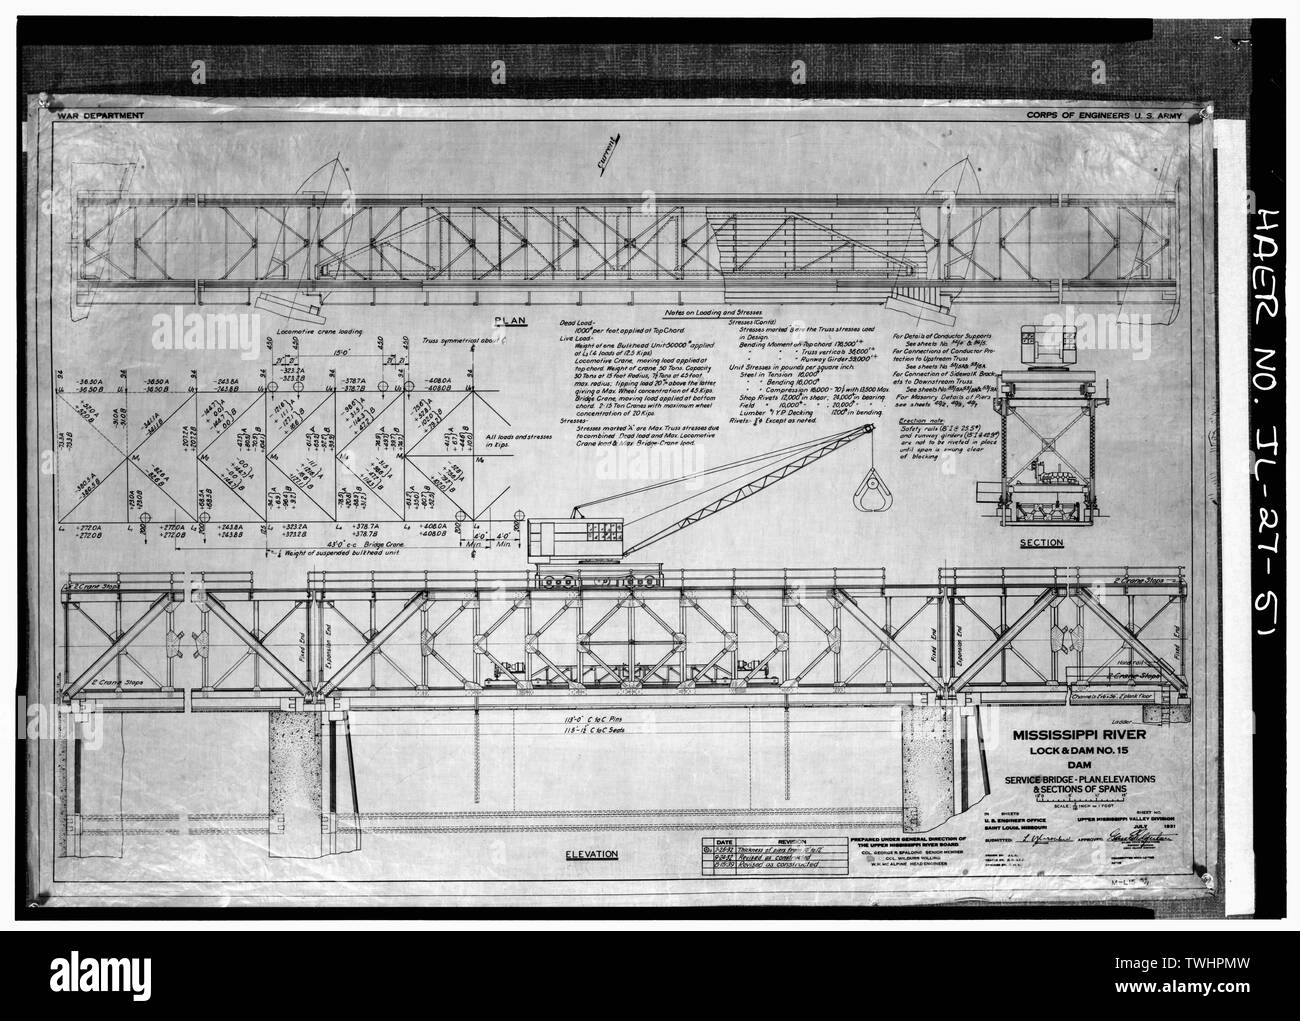 SERVICE BRIDGE-PLAN ELEVATIONS AND SECTIONS OF SPANS. July 1931 - Mississippi River 9-Foot Channel Project, Lock and Dam No. 15, Upper Mississipi River (Arsenal Island), Rock Island, Rock Island County, IL; U.S. Army Corps of Engineers; S.A. Healy Company; Merrit-Chapman-Whitney Corporation; Ylvisaker, Lenvik; Piel, John H; McCormick, Herbert Stock Photo